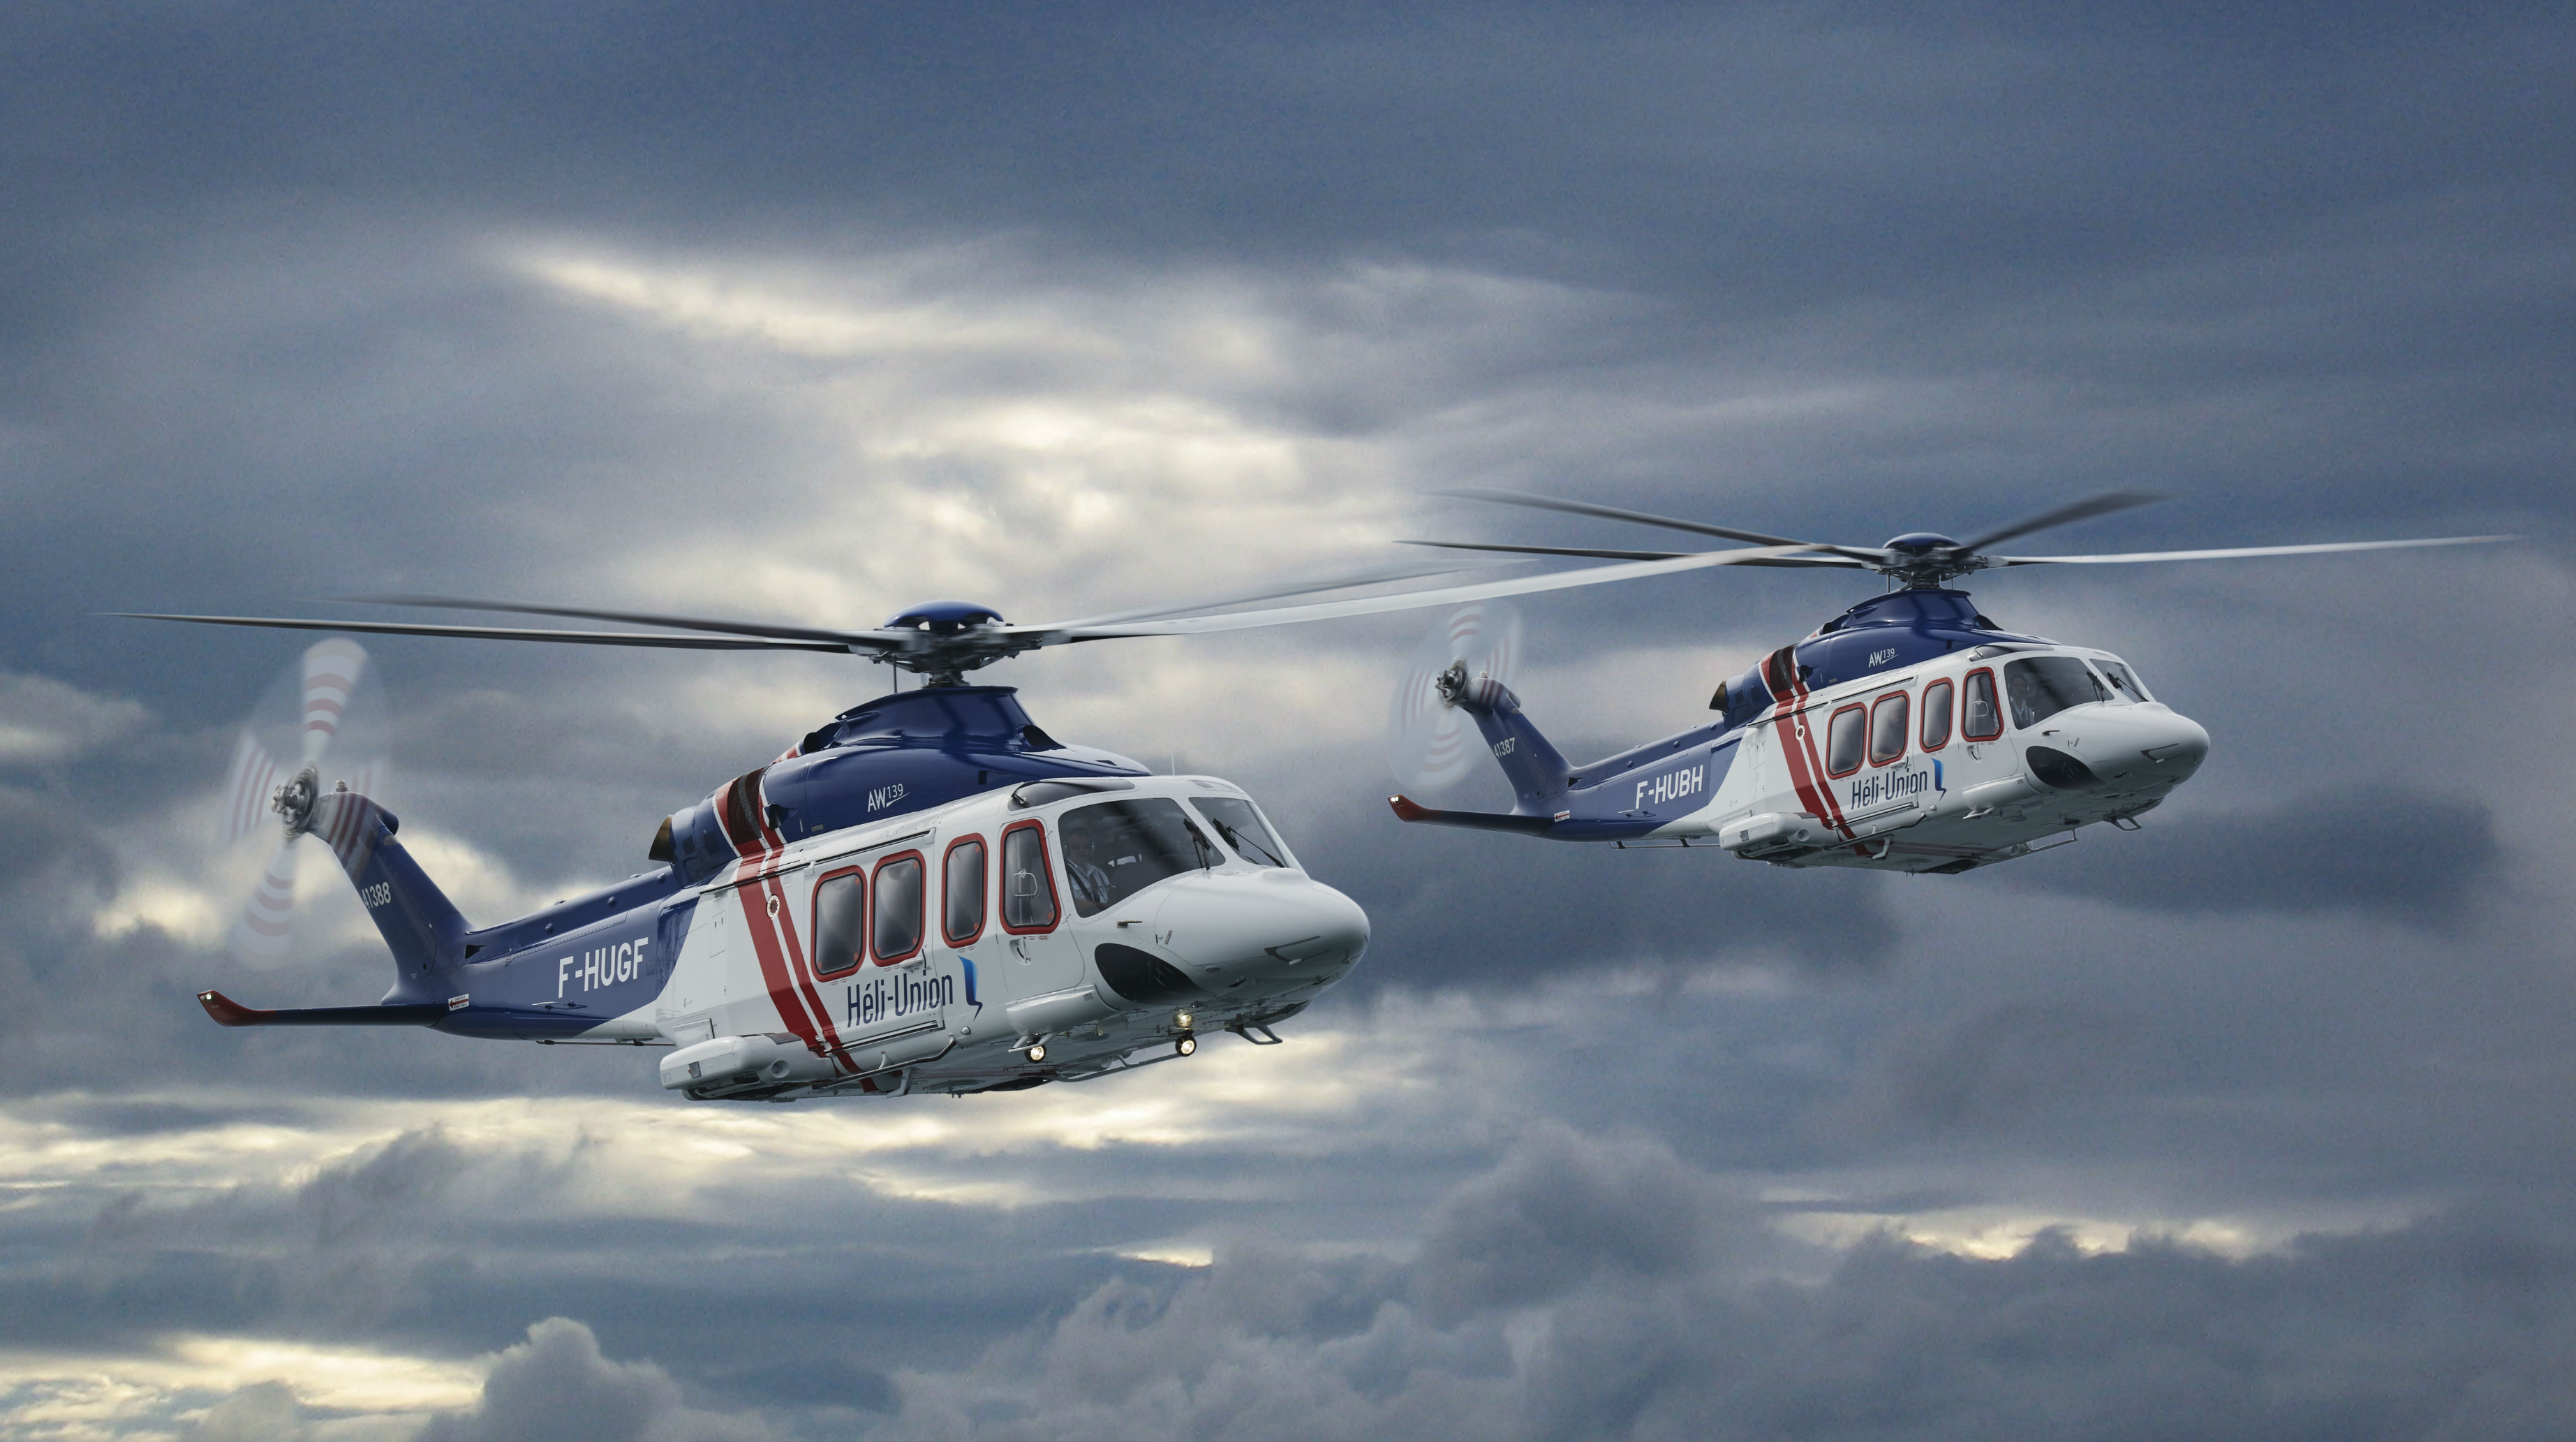 Heli Union is currently operating 8 AW139s in Africa and in Asia. Heli Union Image